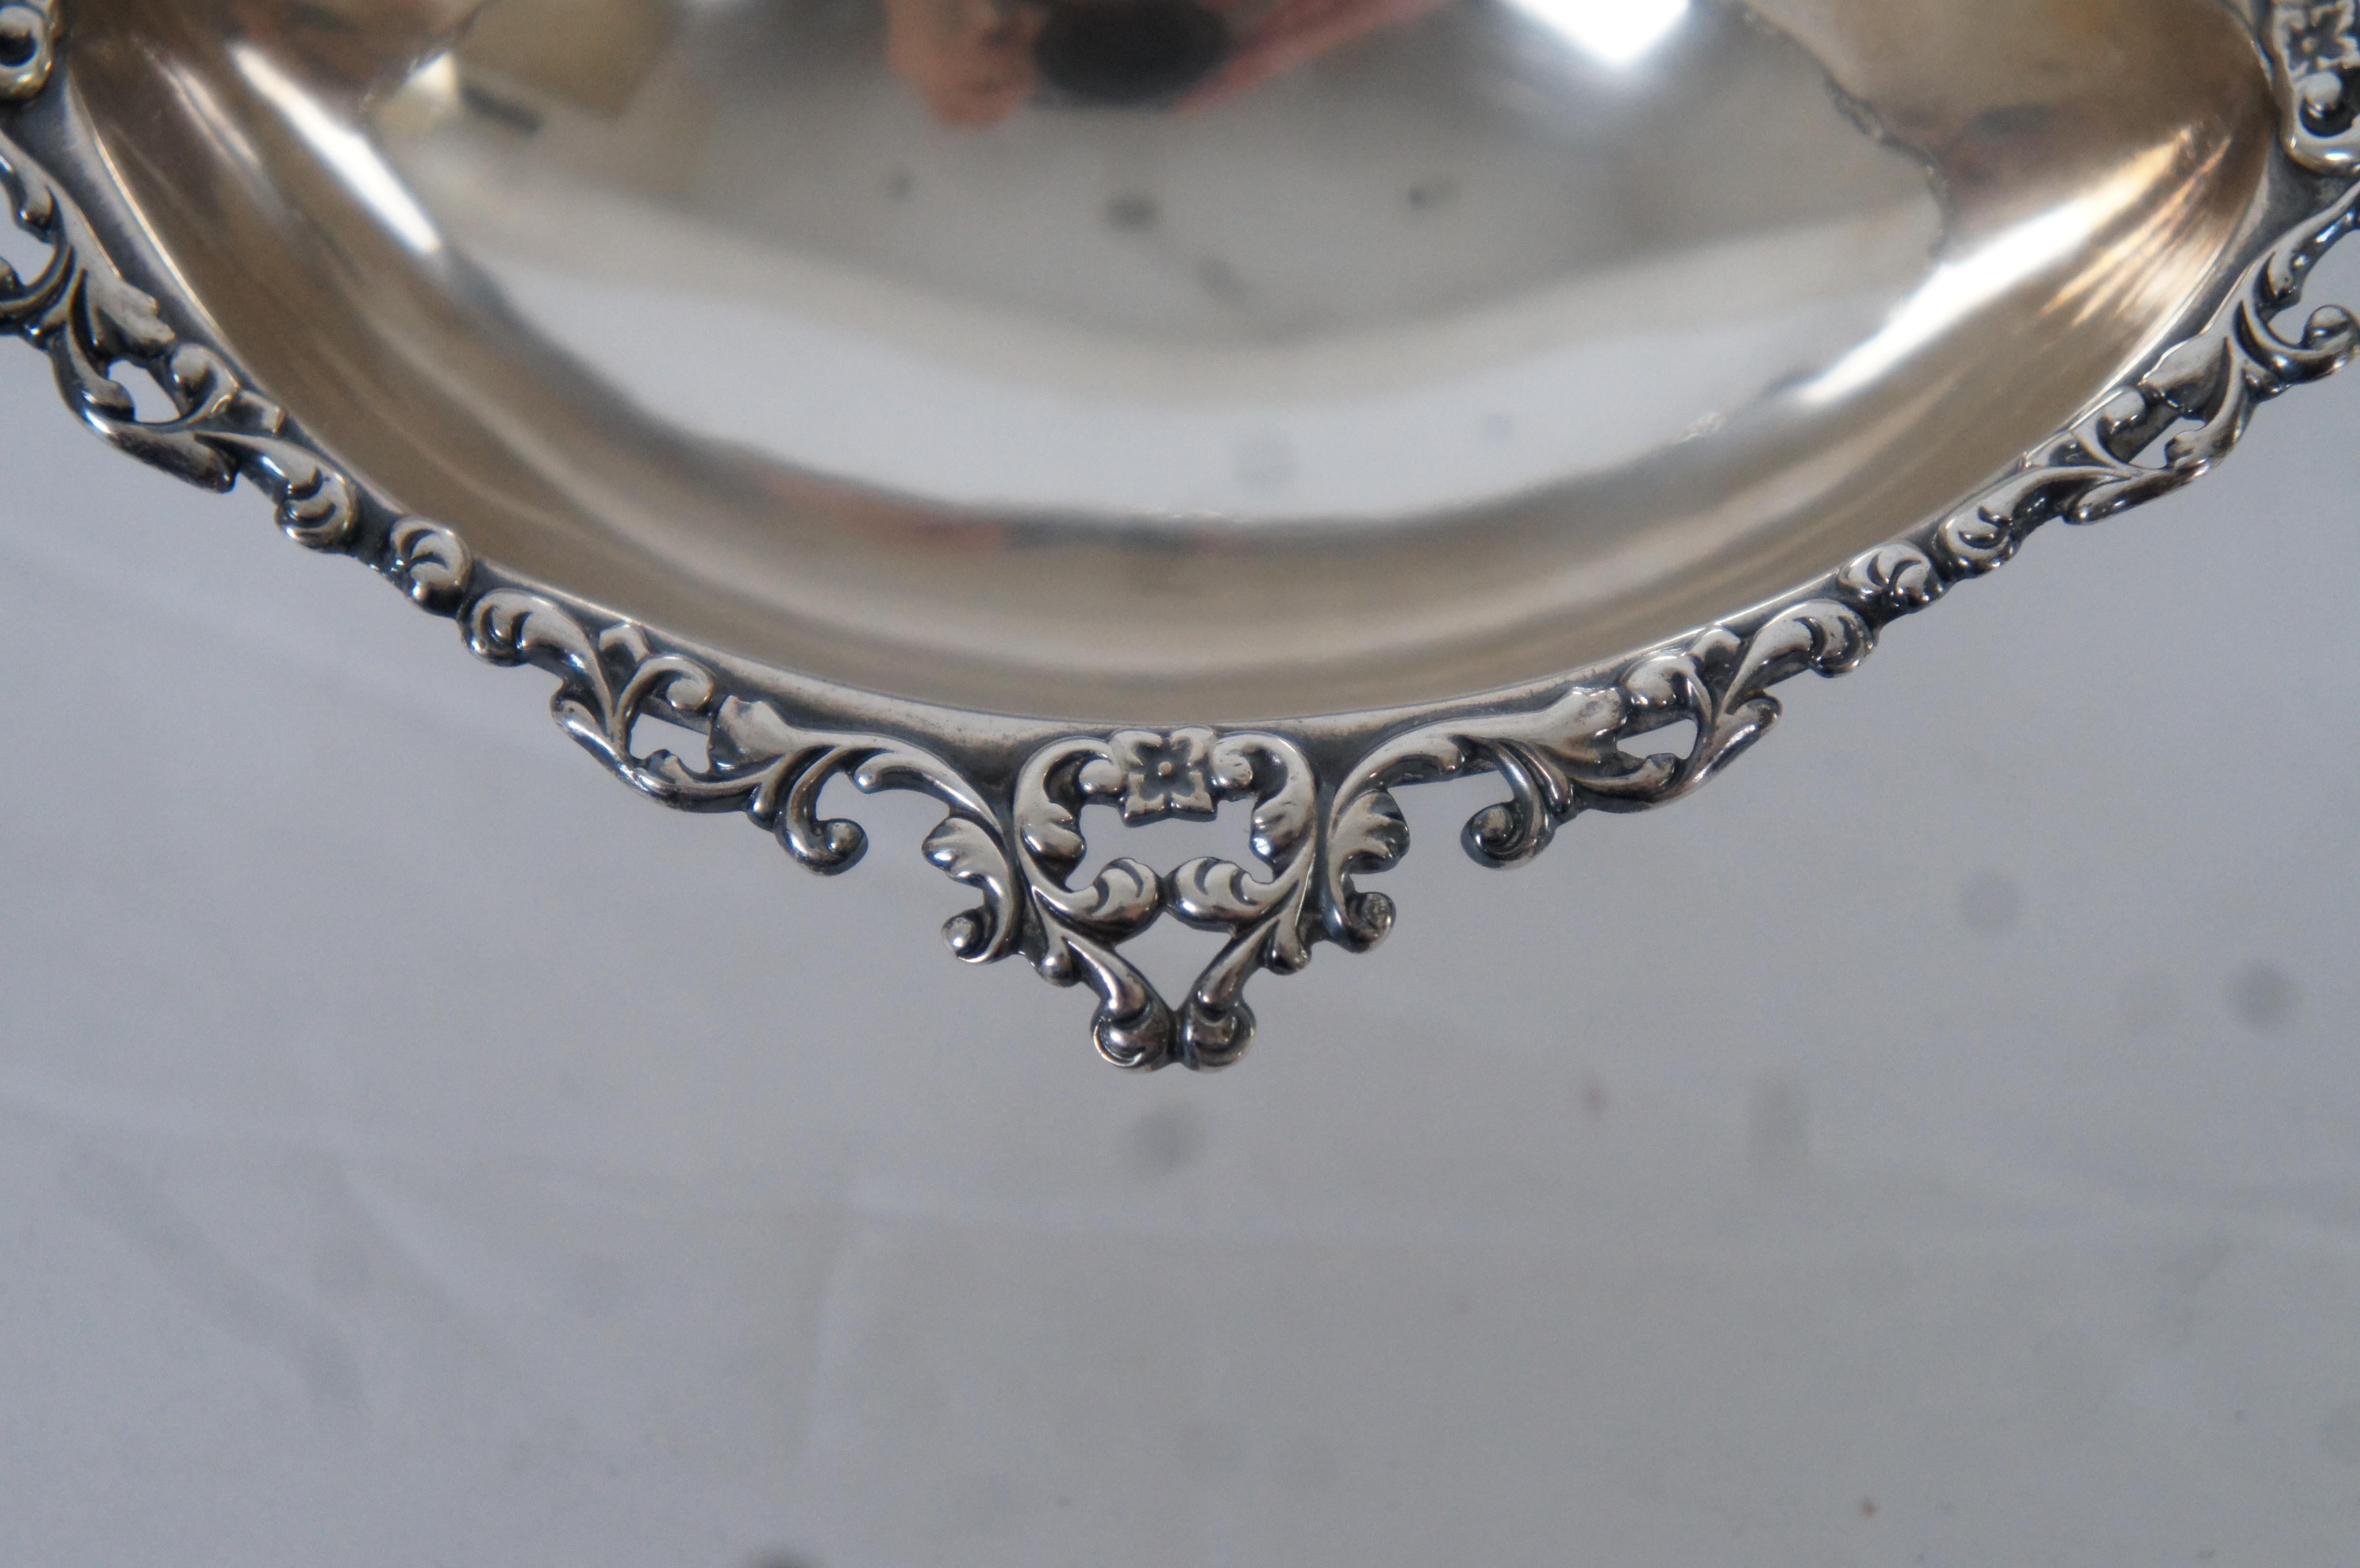 Antique Galt & Bro 72 Baroque Sterling Silver Footed Bowl Compote Nut Dish 45g 4